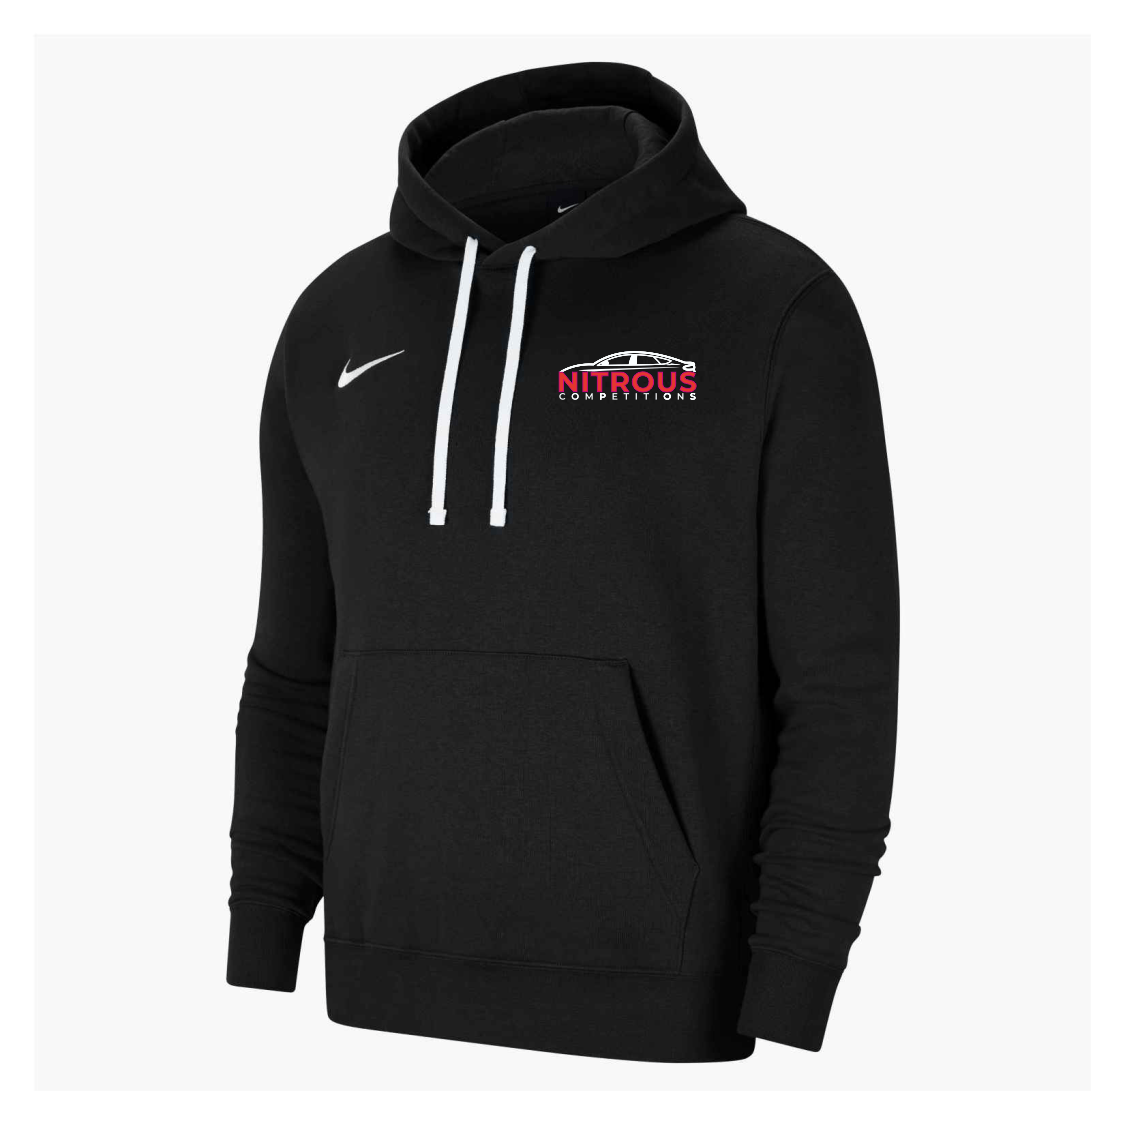 Nitrous Competitions - Nike Black Hoodie